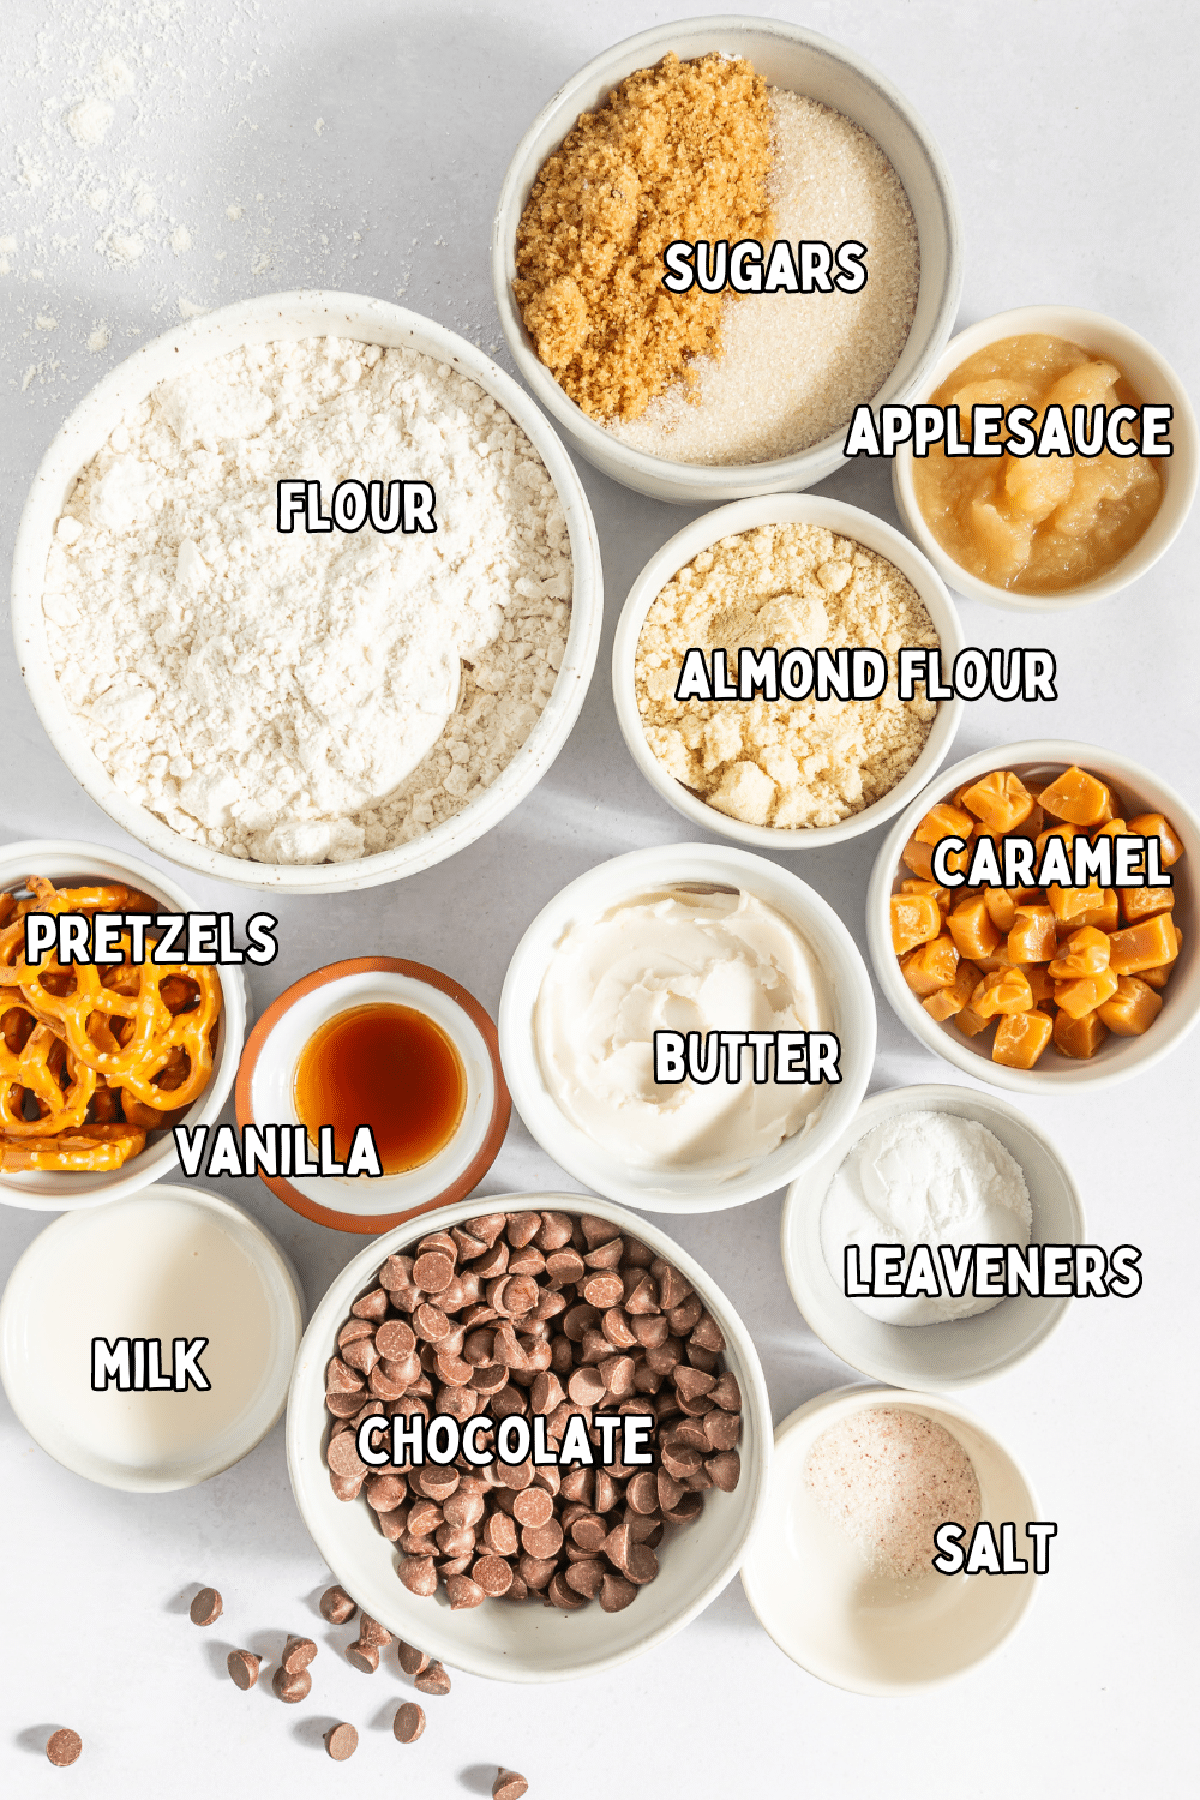 Small bowls of ingredients for a skillet cookie: flours, sugars, applesauce, caramel, butter, vanilla, pretzels, milk, chocolate, leaveners, and salt.